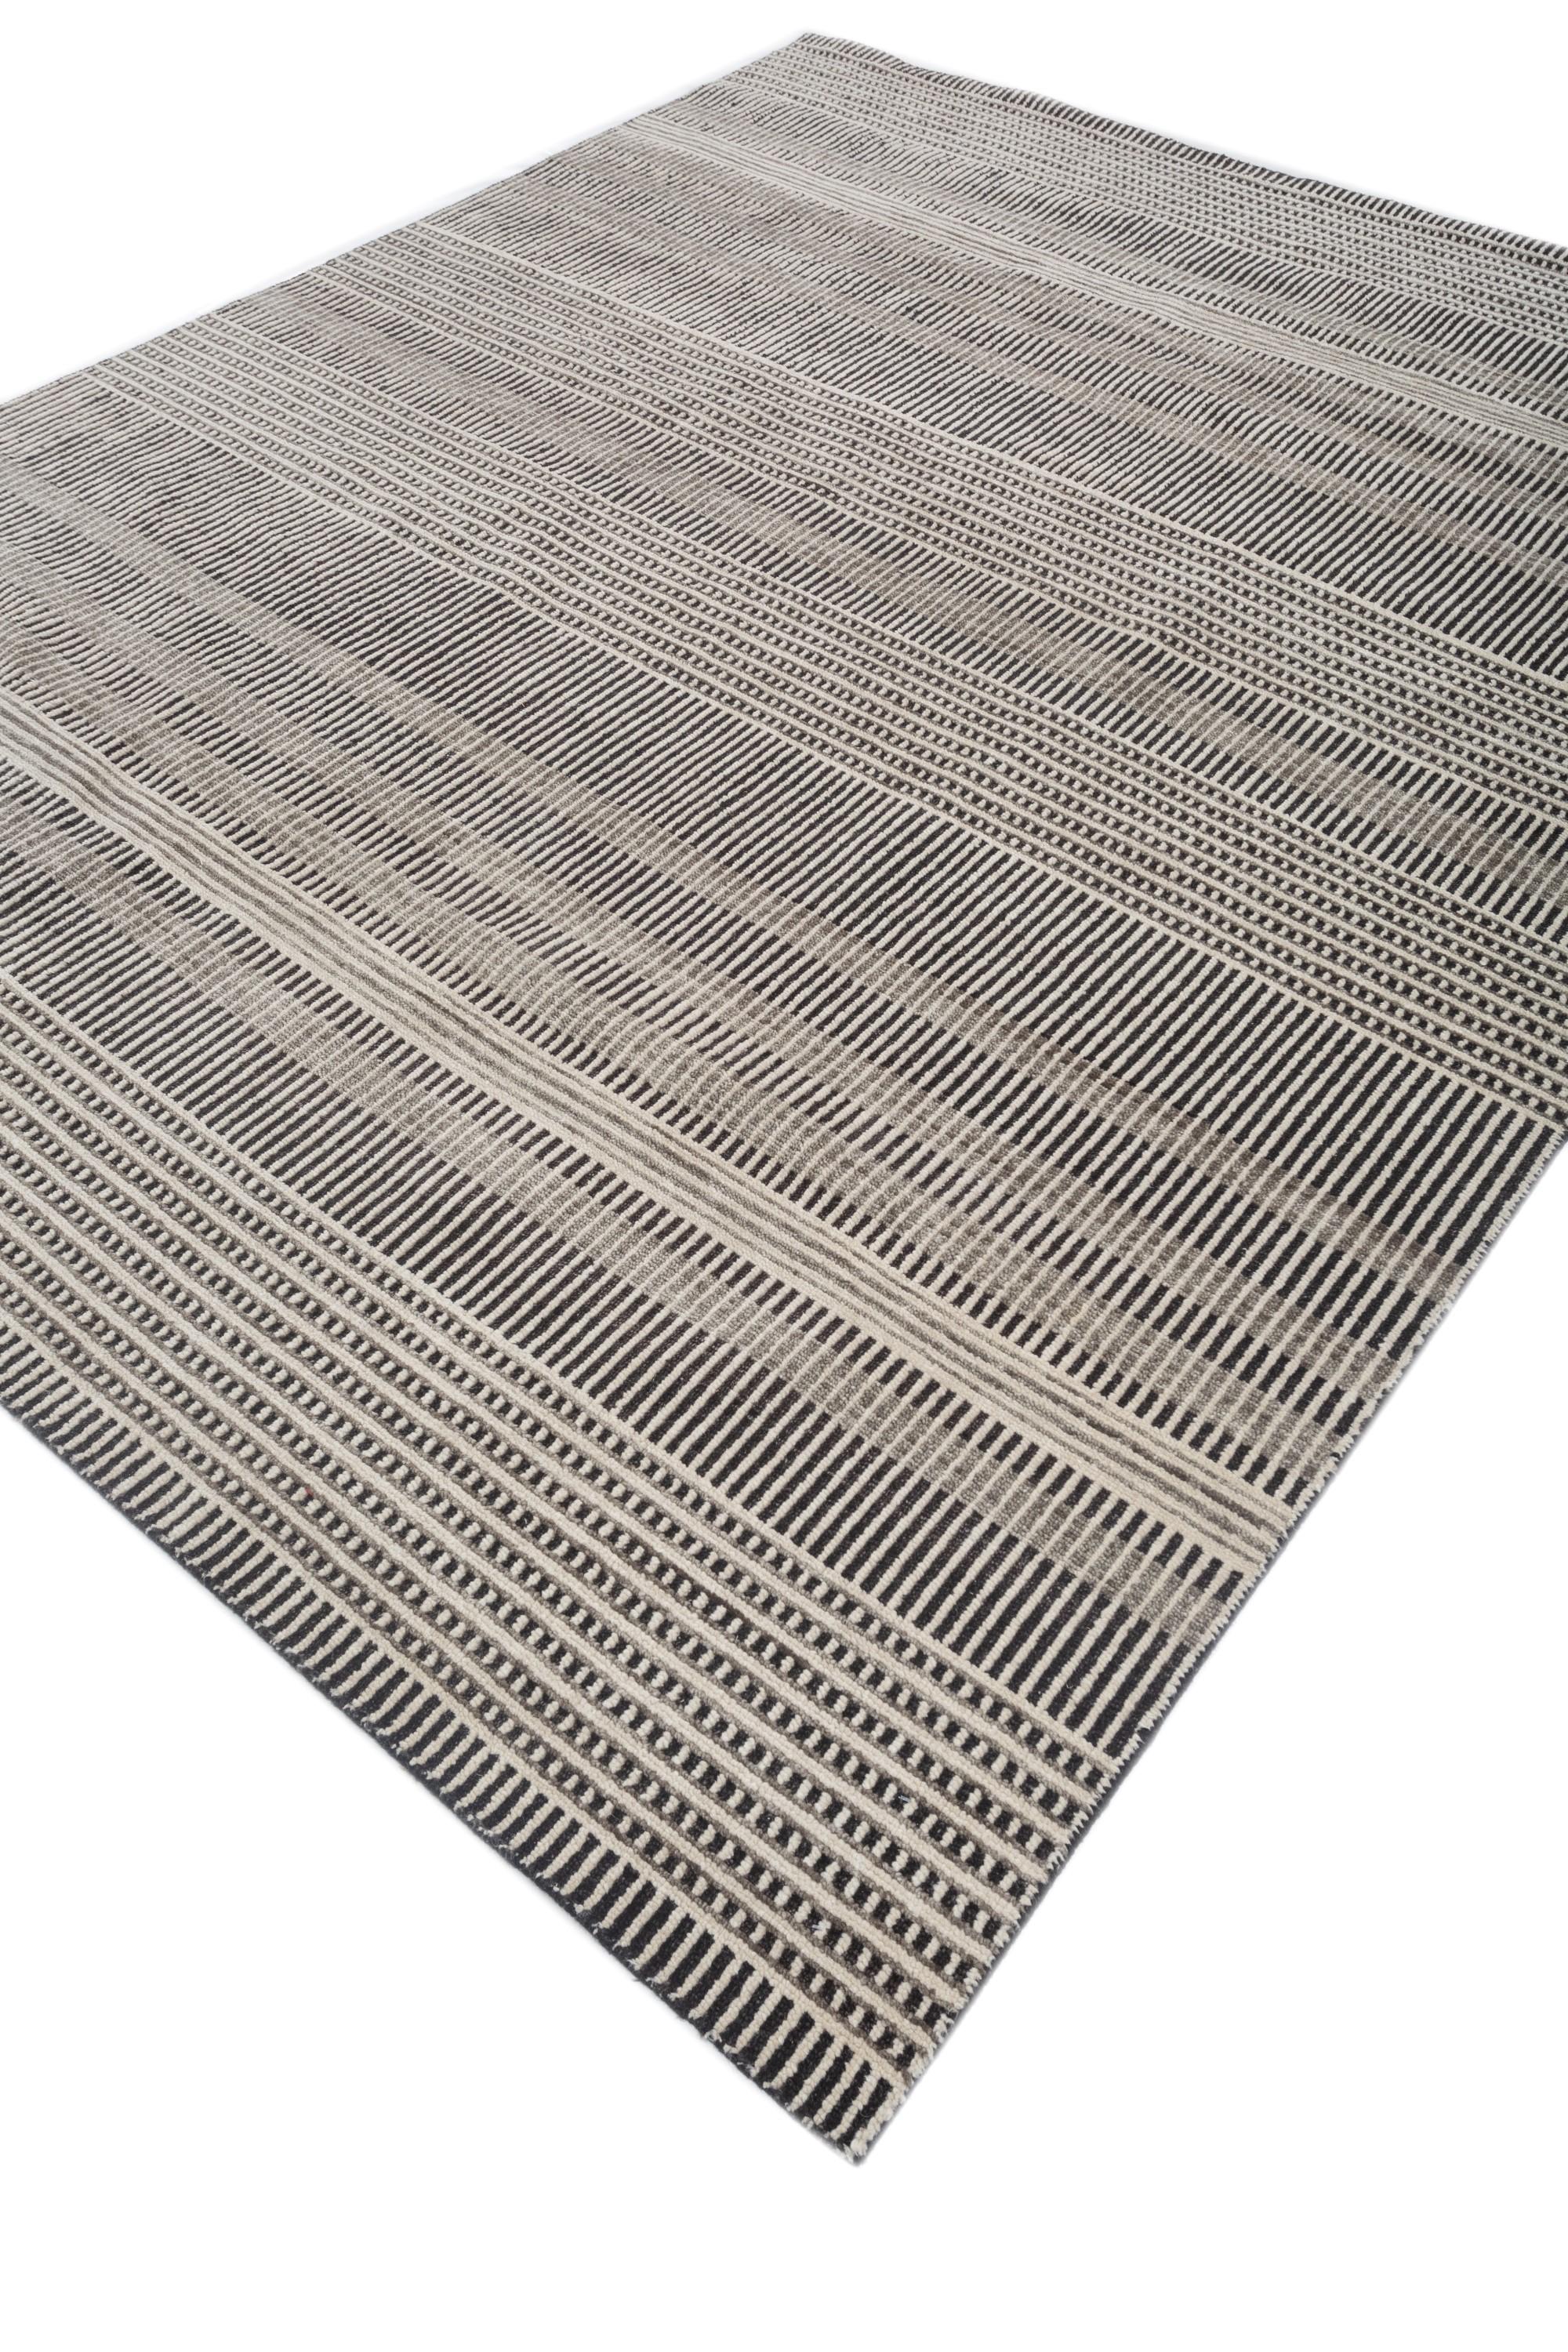 Indian Stripes in Motion Classic Gray & Caviar 240x300 cm Handamde Rug For Sale